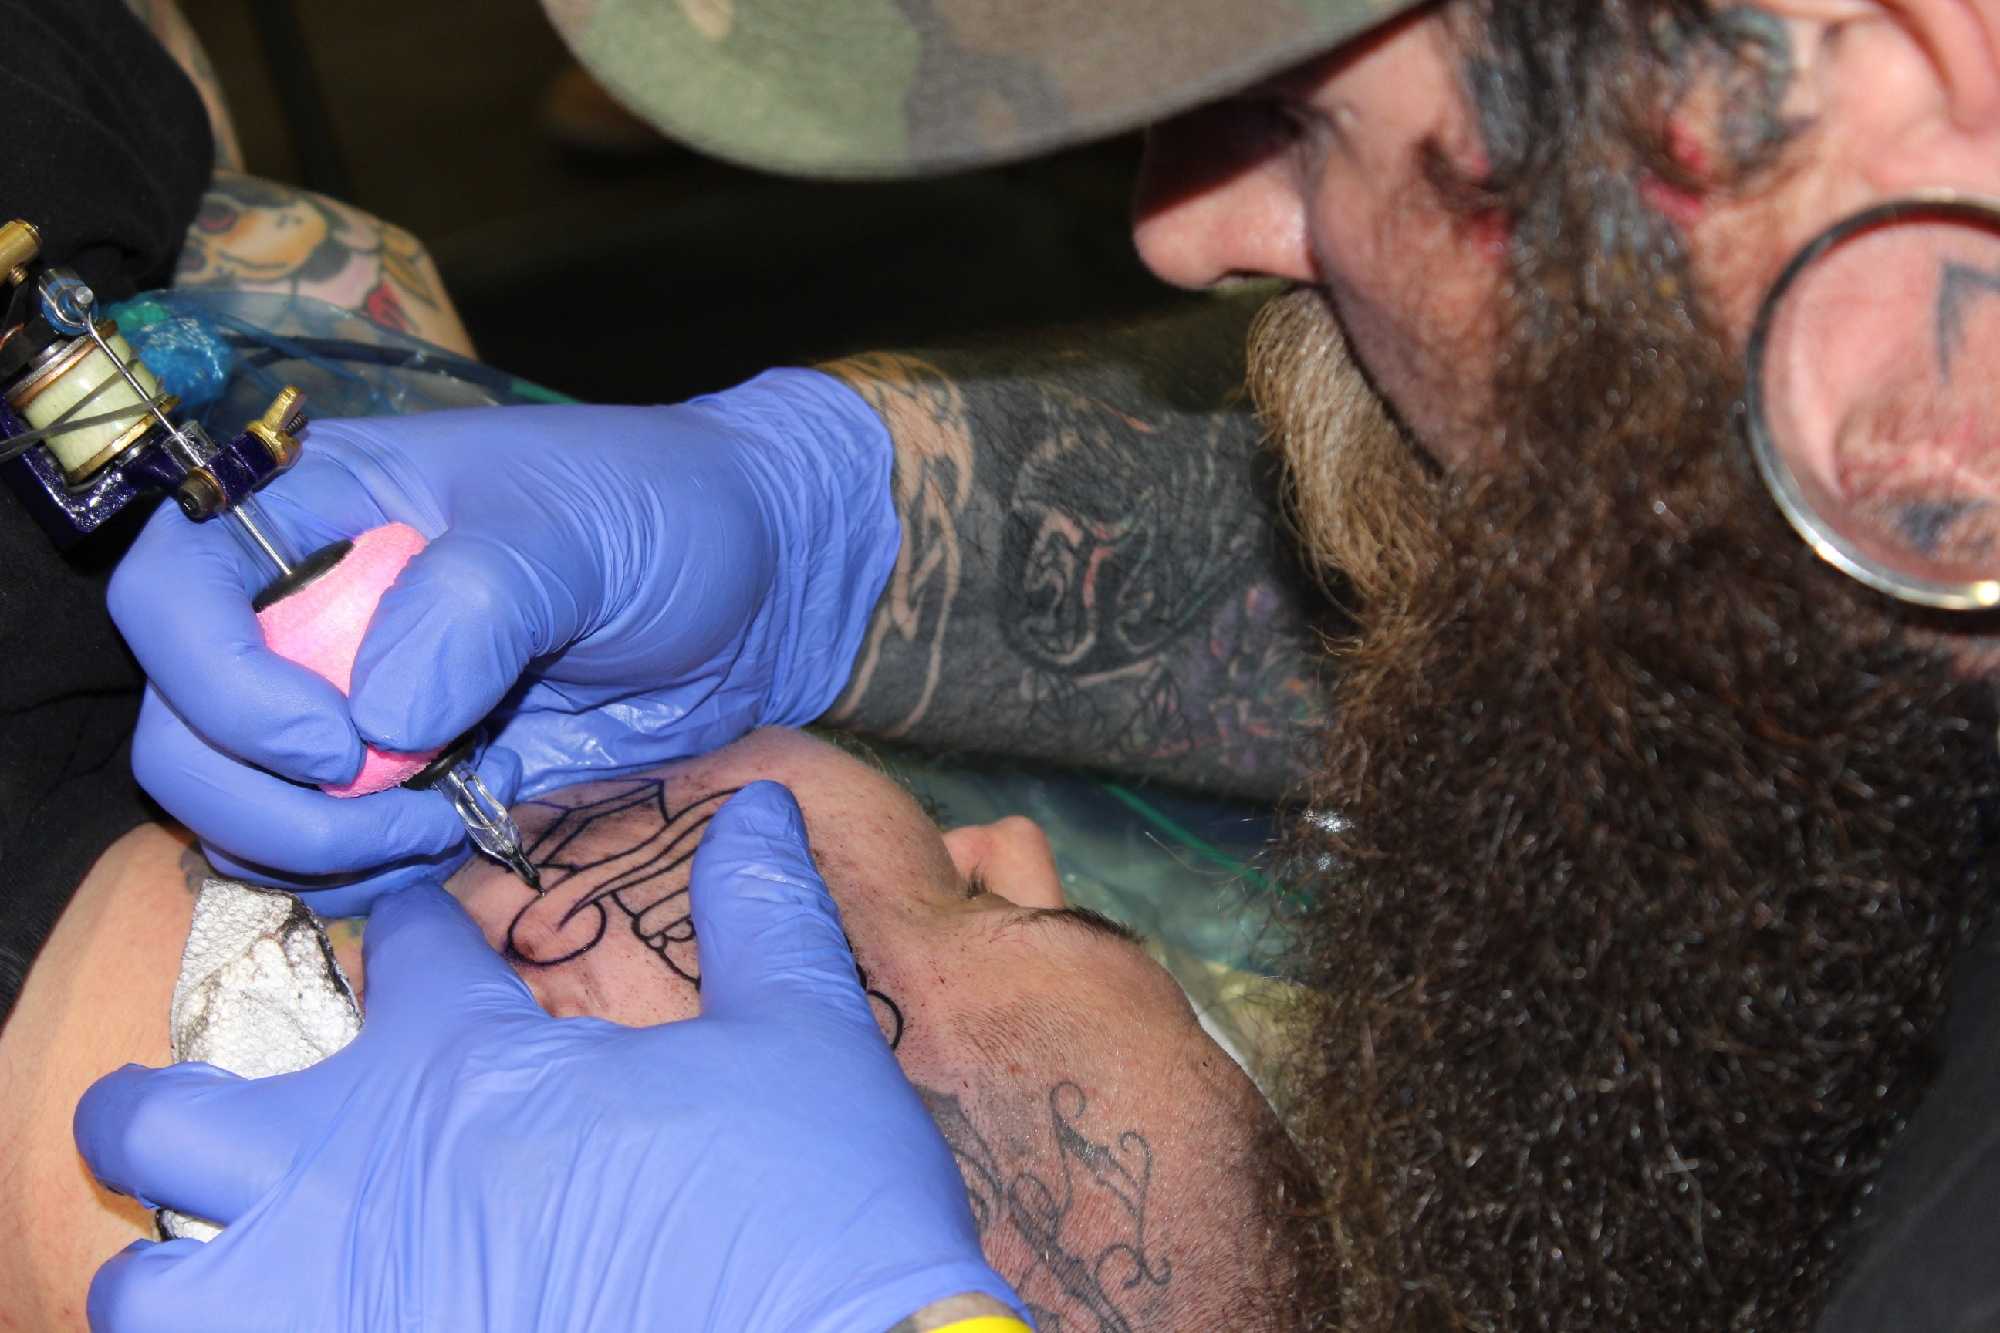 A common sense guide to your first tattoo | The Week